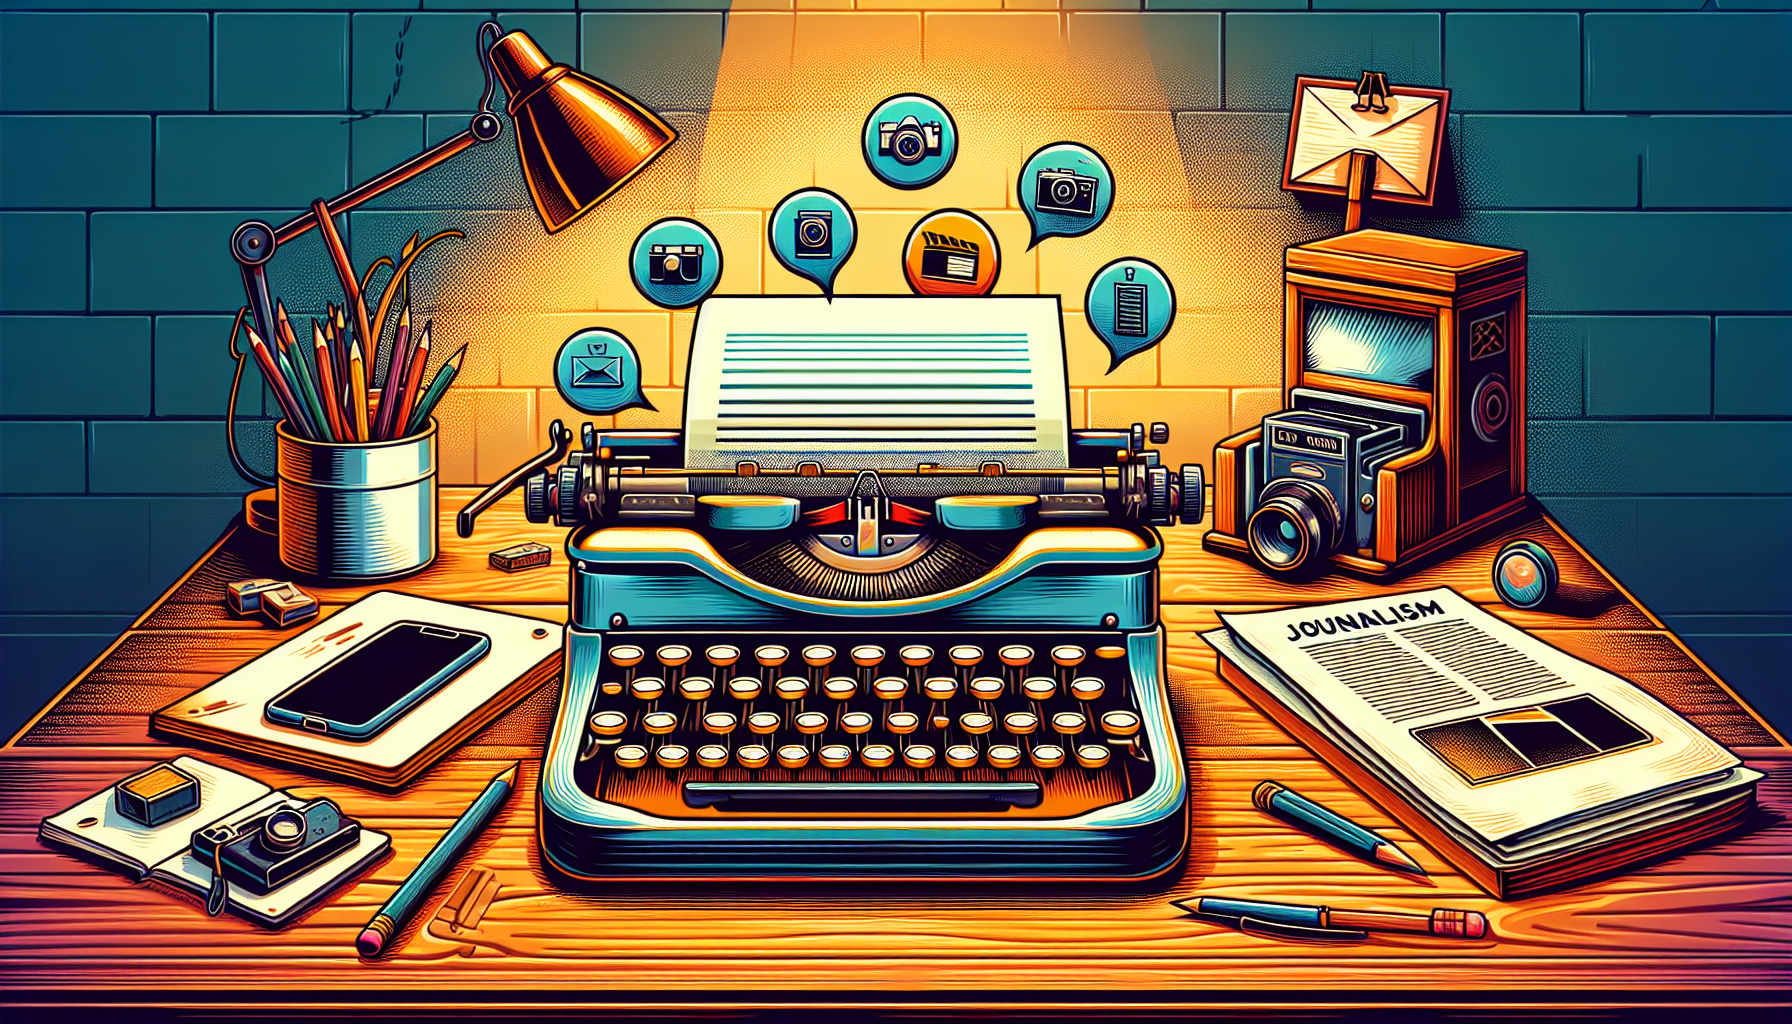 An artistic representation of a vintage typewriter on an old wooden desk with a sheet of paper featuring the word 'Slugline' prominently at the top, surrounded by colorful floating icons symbolizing j